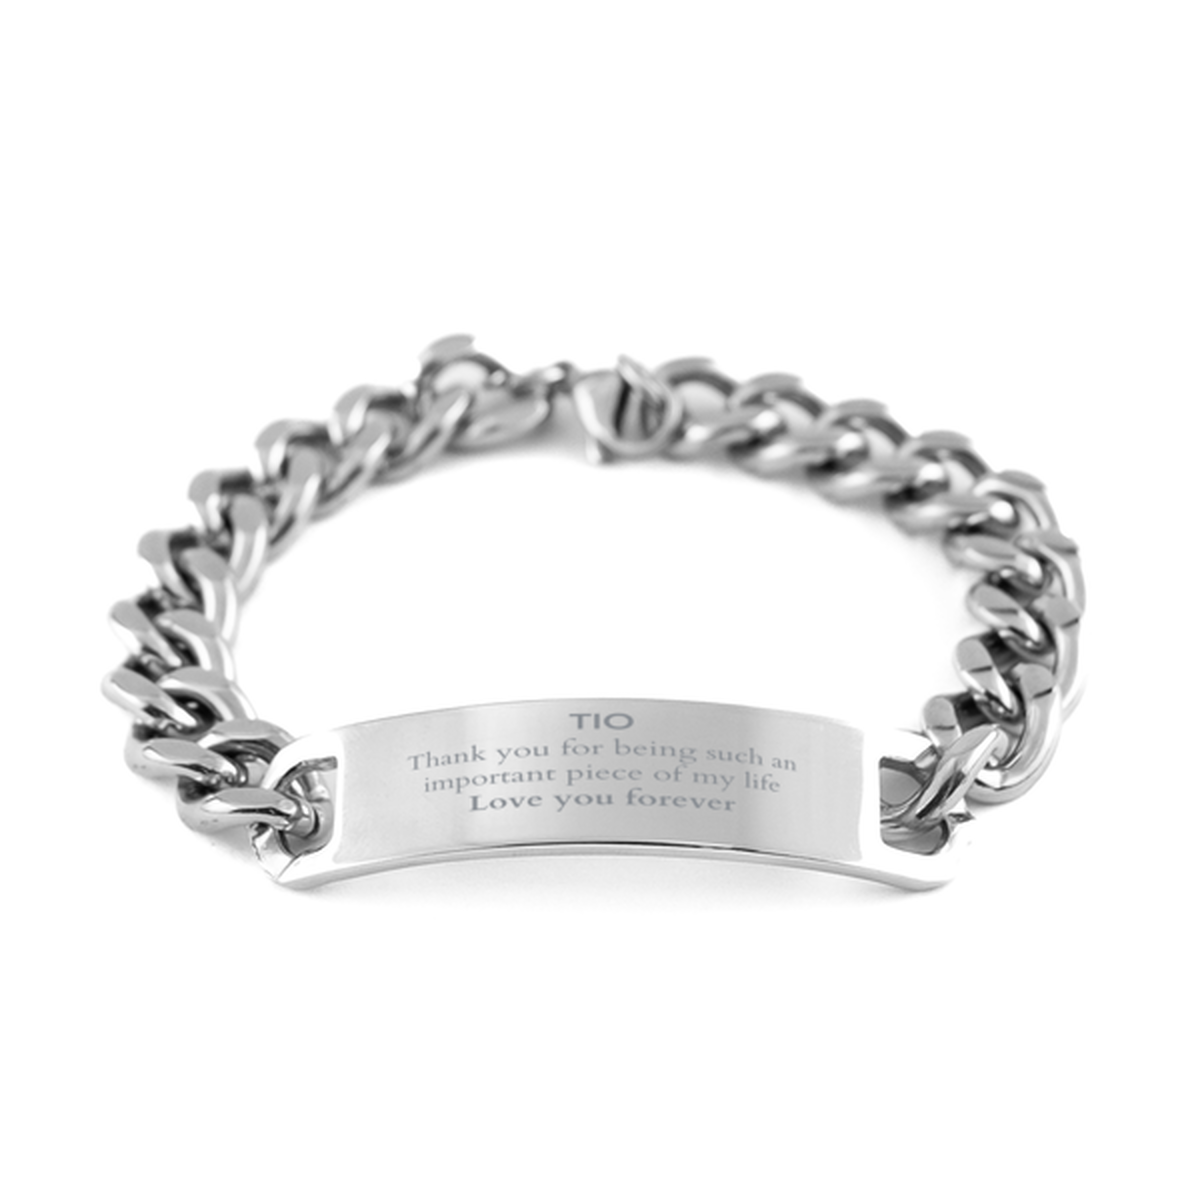 Appropriate Tio Cuban Chain Stainless Steel Bracelet Epic Birthday Gifts for Tio Thank you for being such an important piece of my life Tio Christmas Mothers Fathers Day